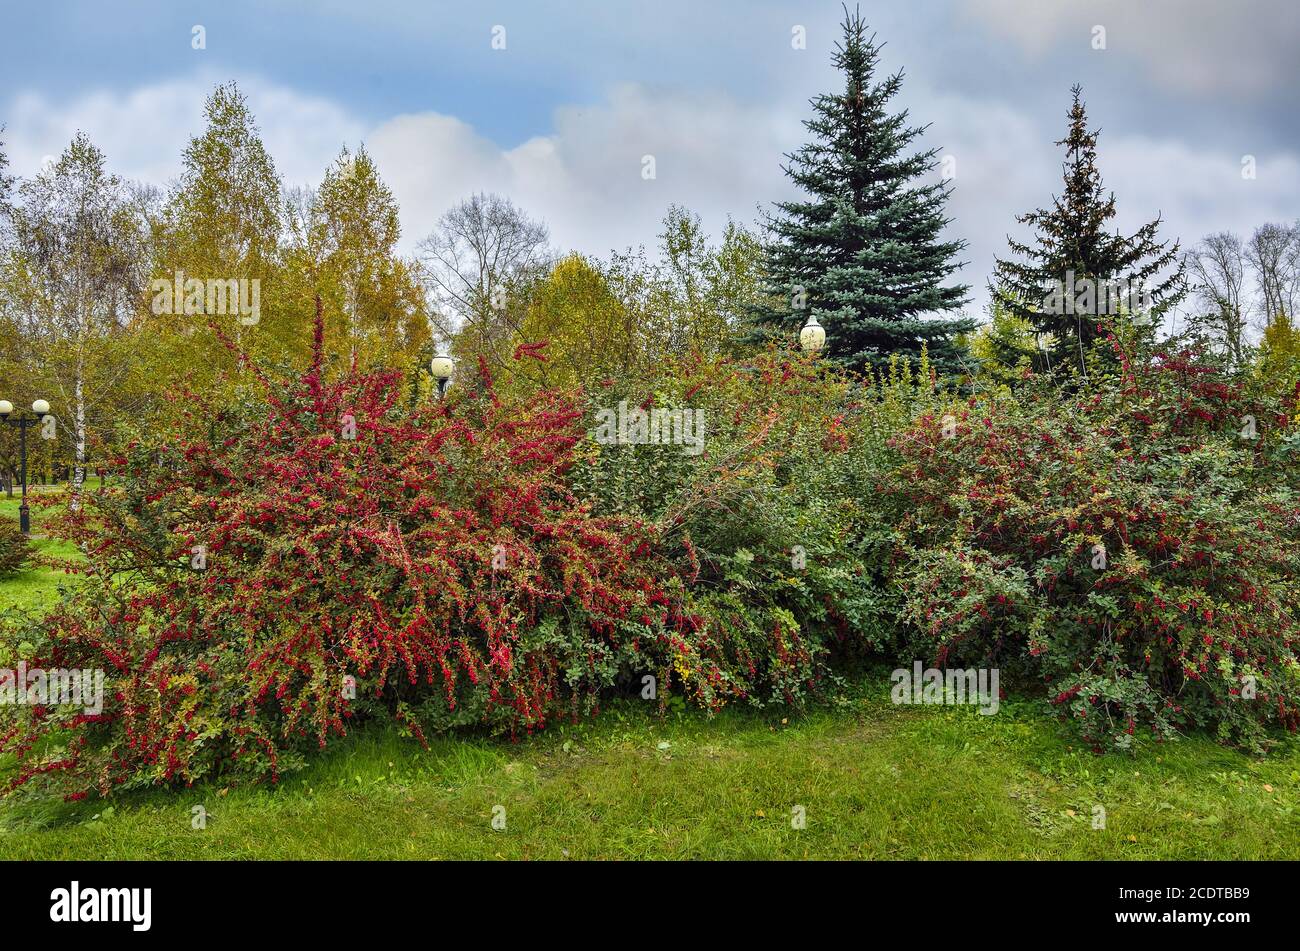 Red berries on the barberry bushes in autumn park landscape Stock Photo